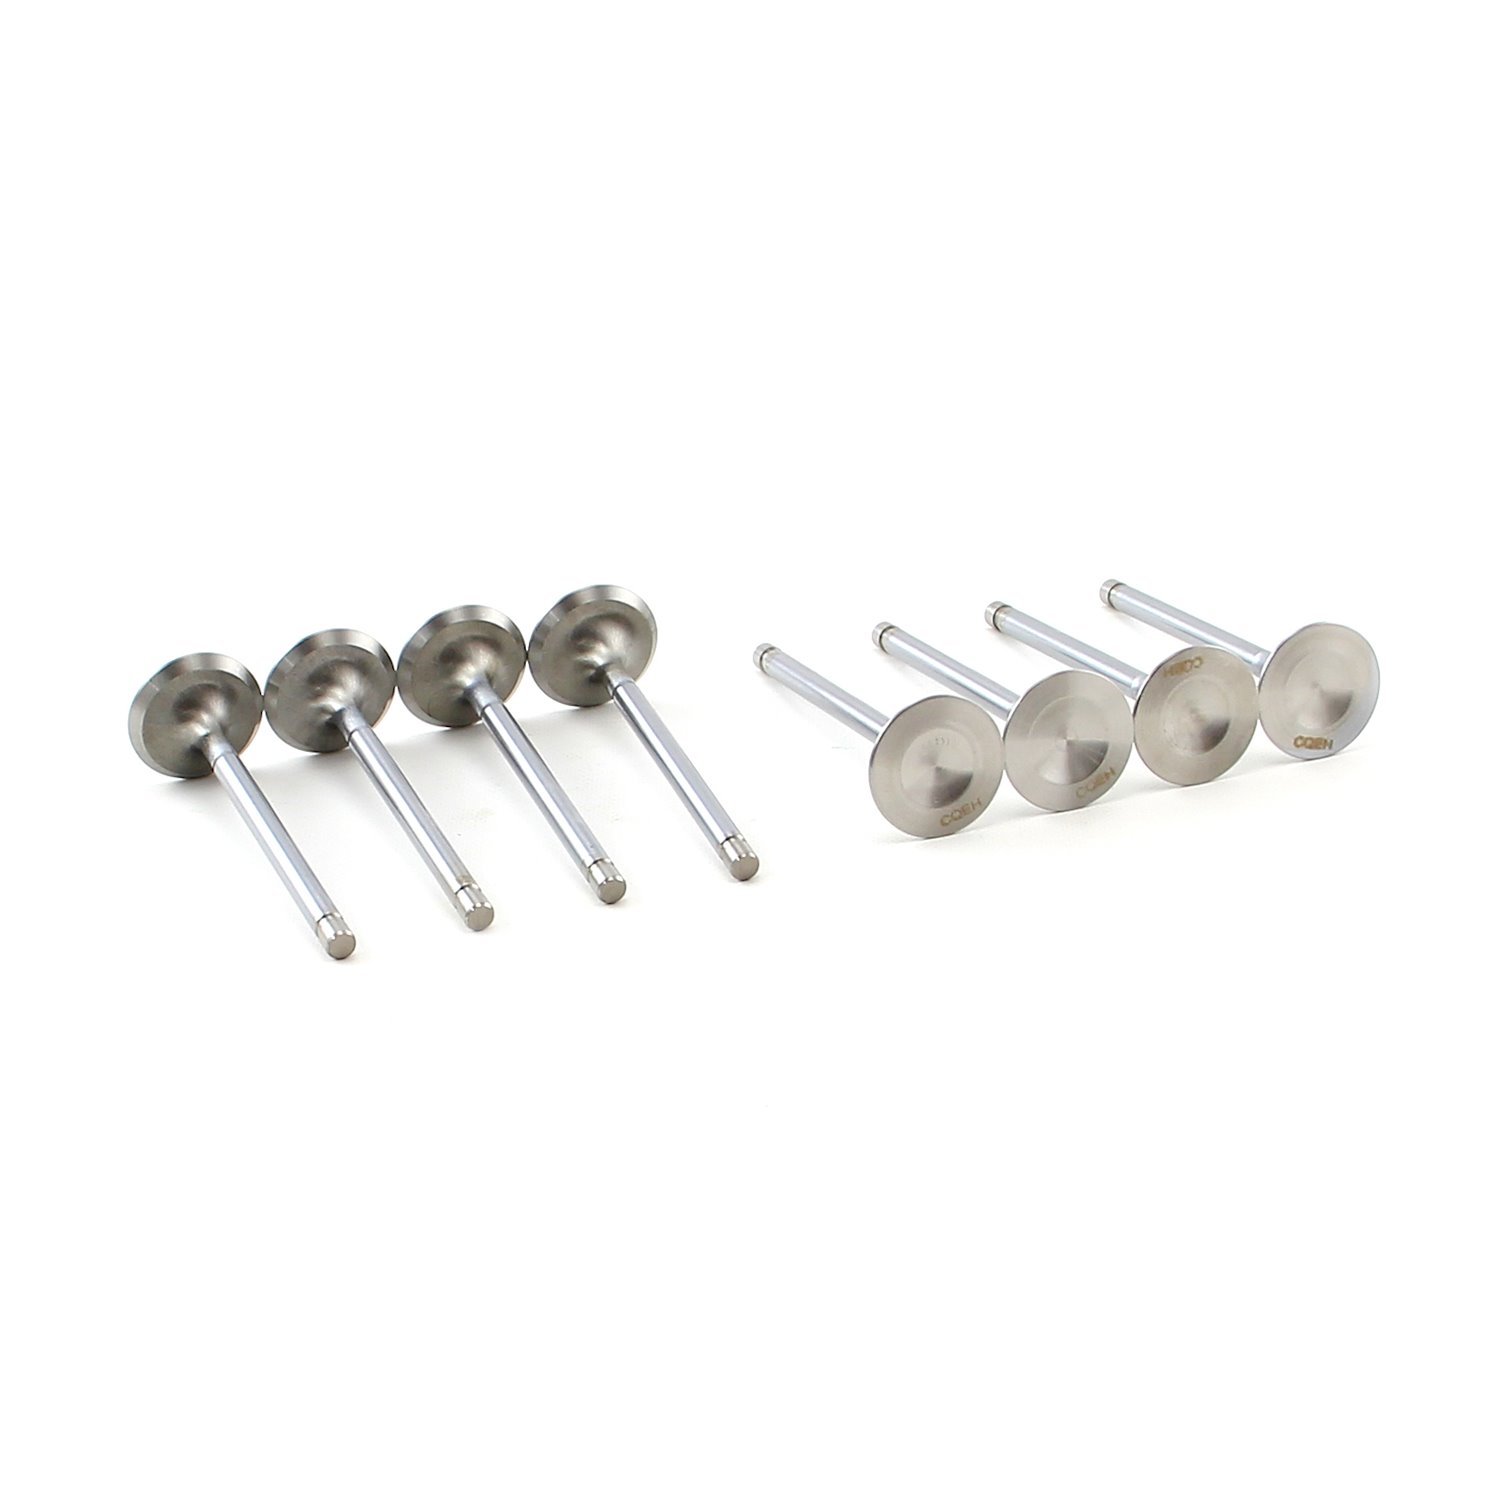 PCE273.1017 Stainless Steel Exhaust Valves Big Block Chevy 454